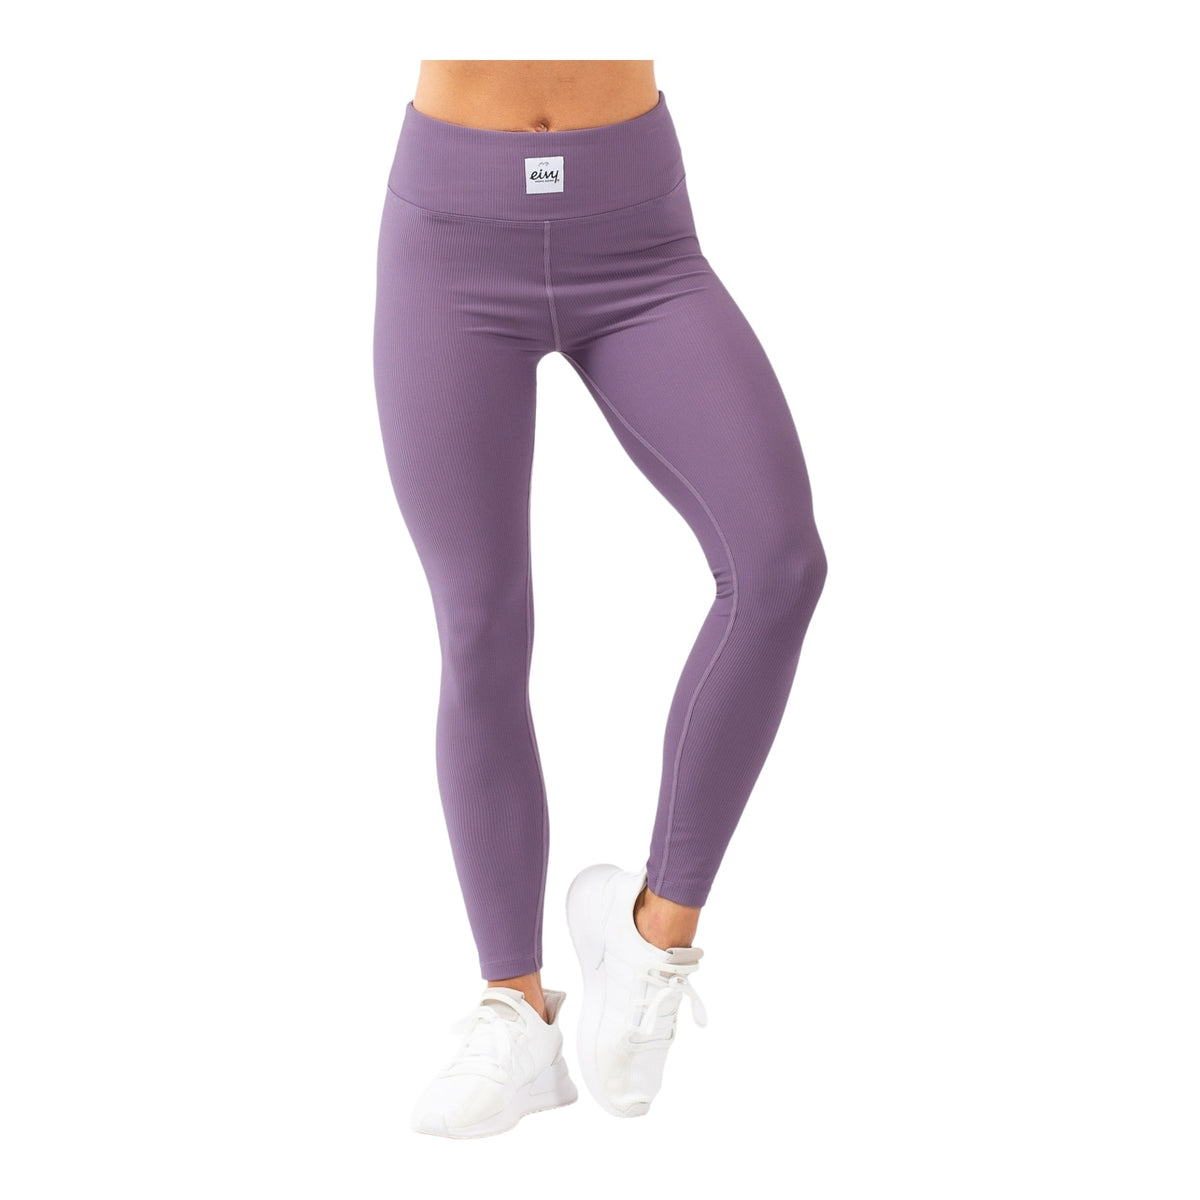 Eivy Base Layer - Icecold Tights Legging